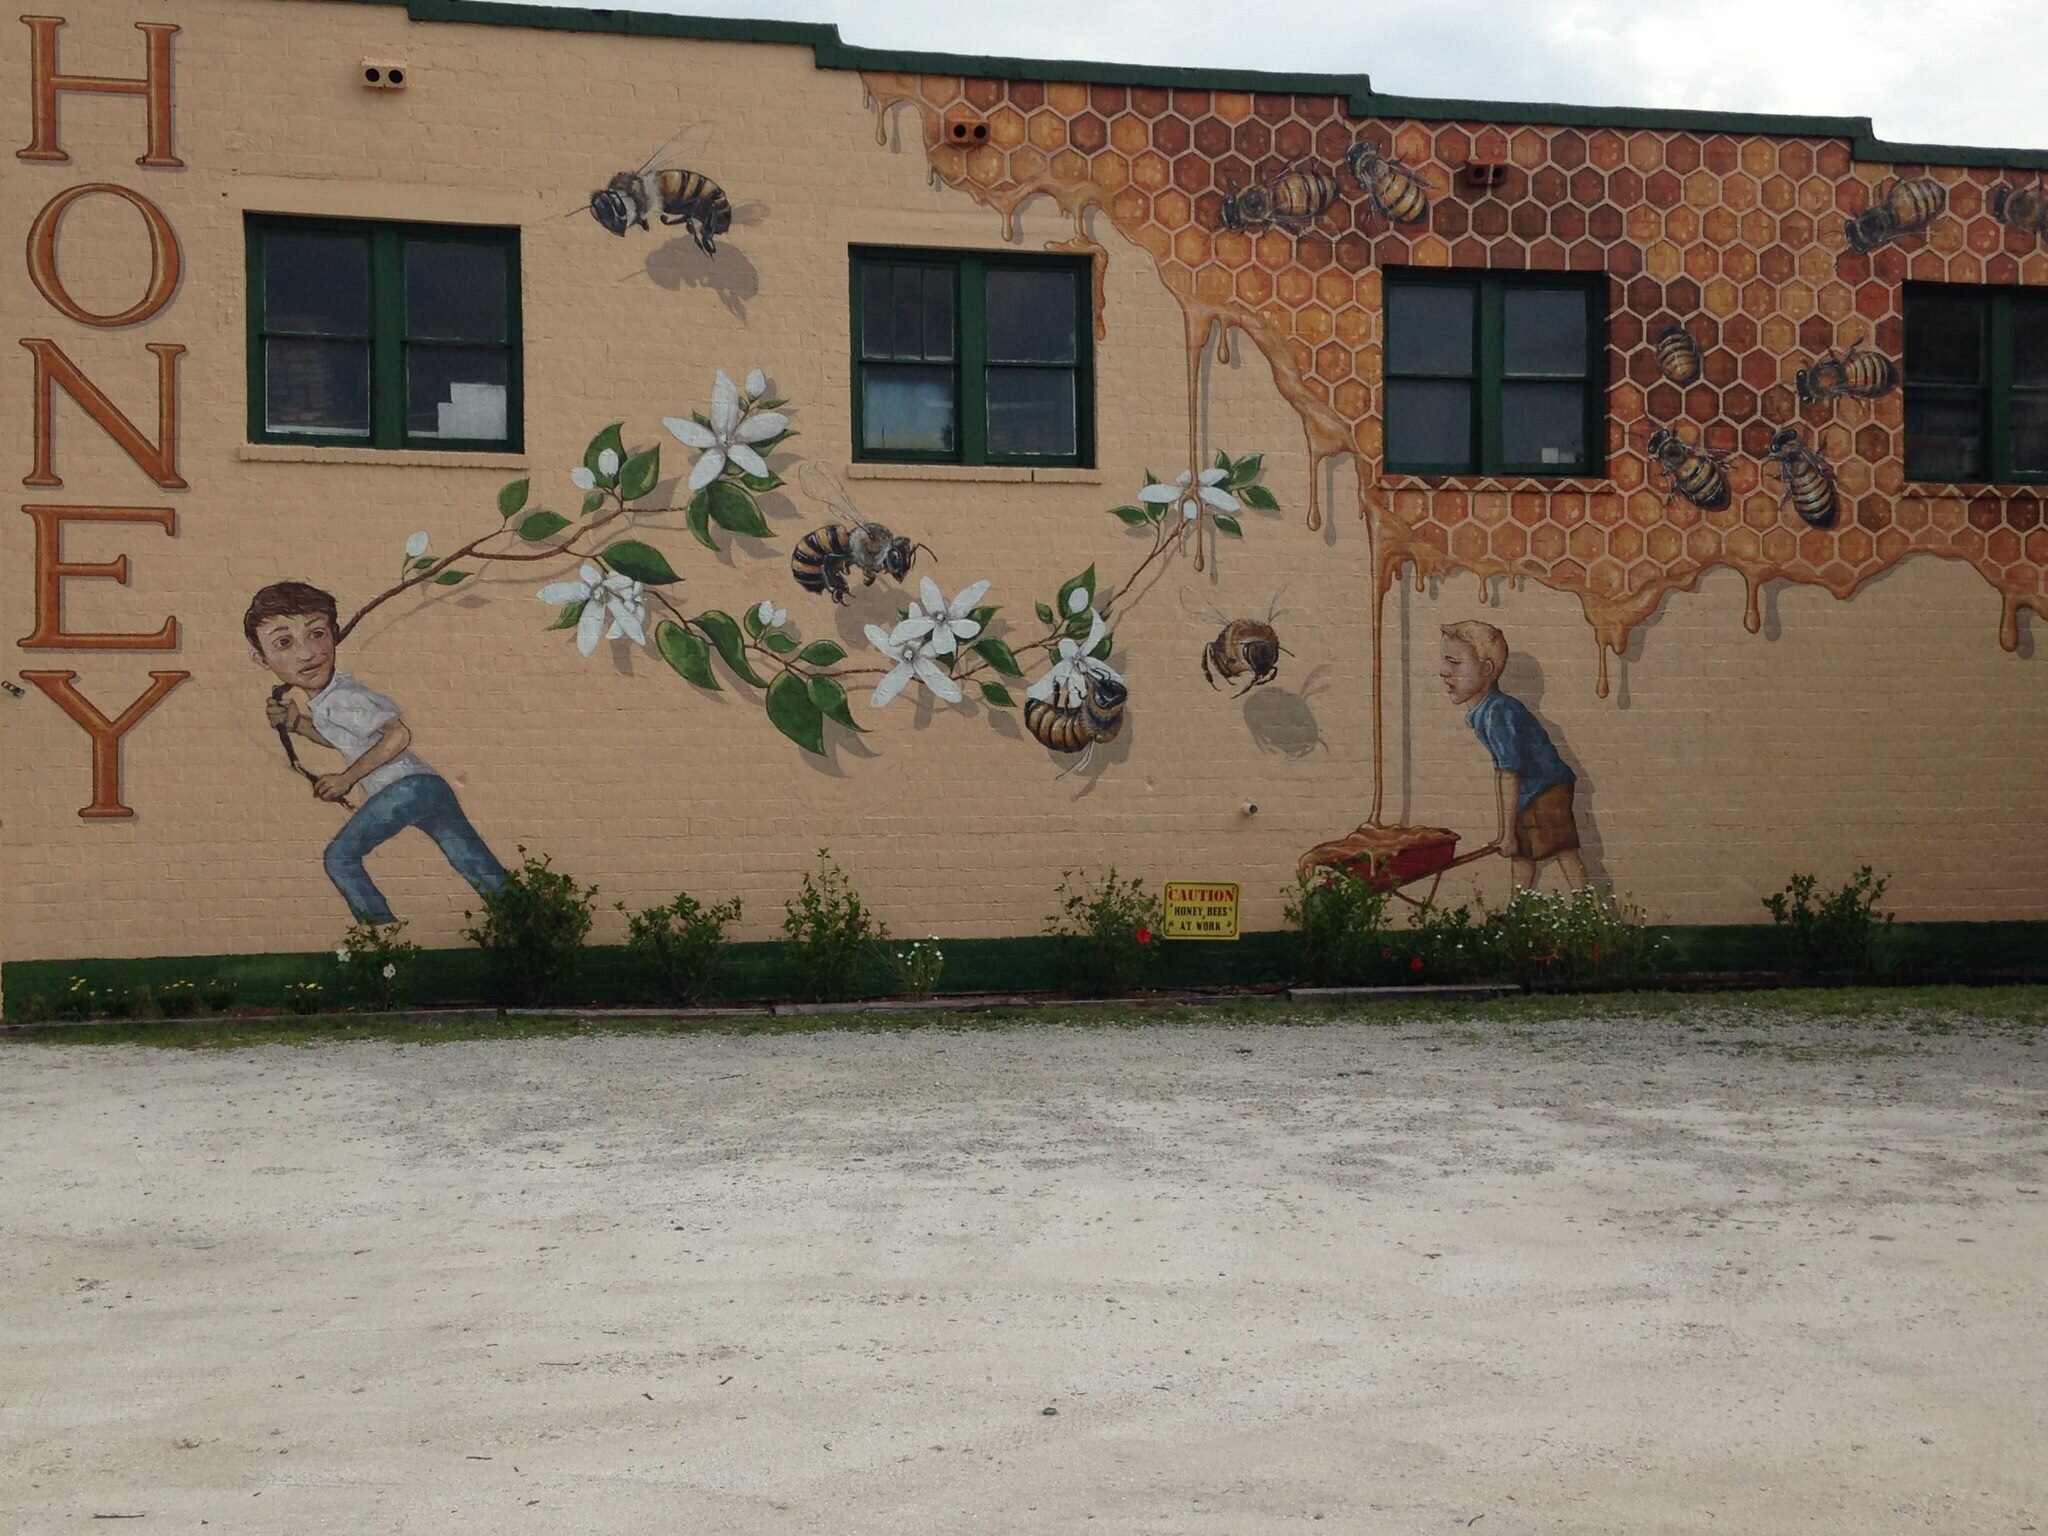 Mural of children carrying honey and running among bees and flowers